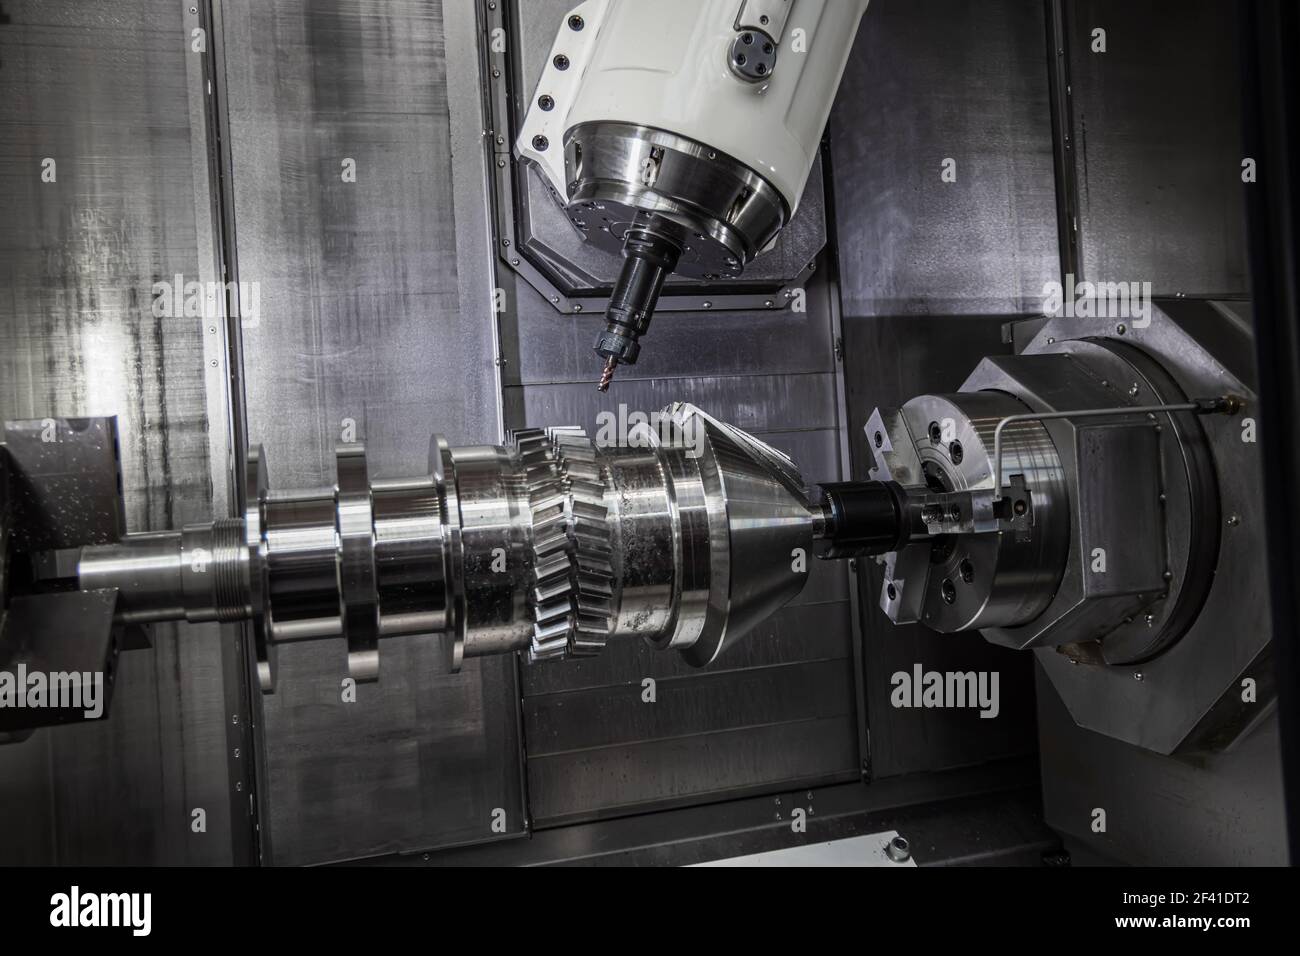 Metalworking CNC lathe milling machine. Cutting metal modern processing technology. Milling is the process of machining using rotary cutters to remove material by advancing a cutter into a workpiece. Stock Photo